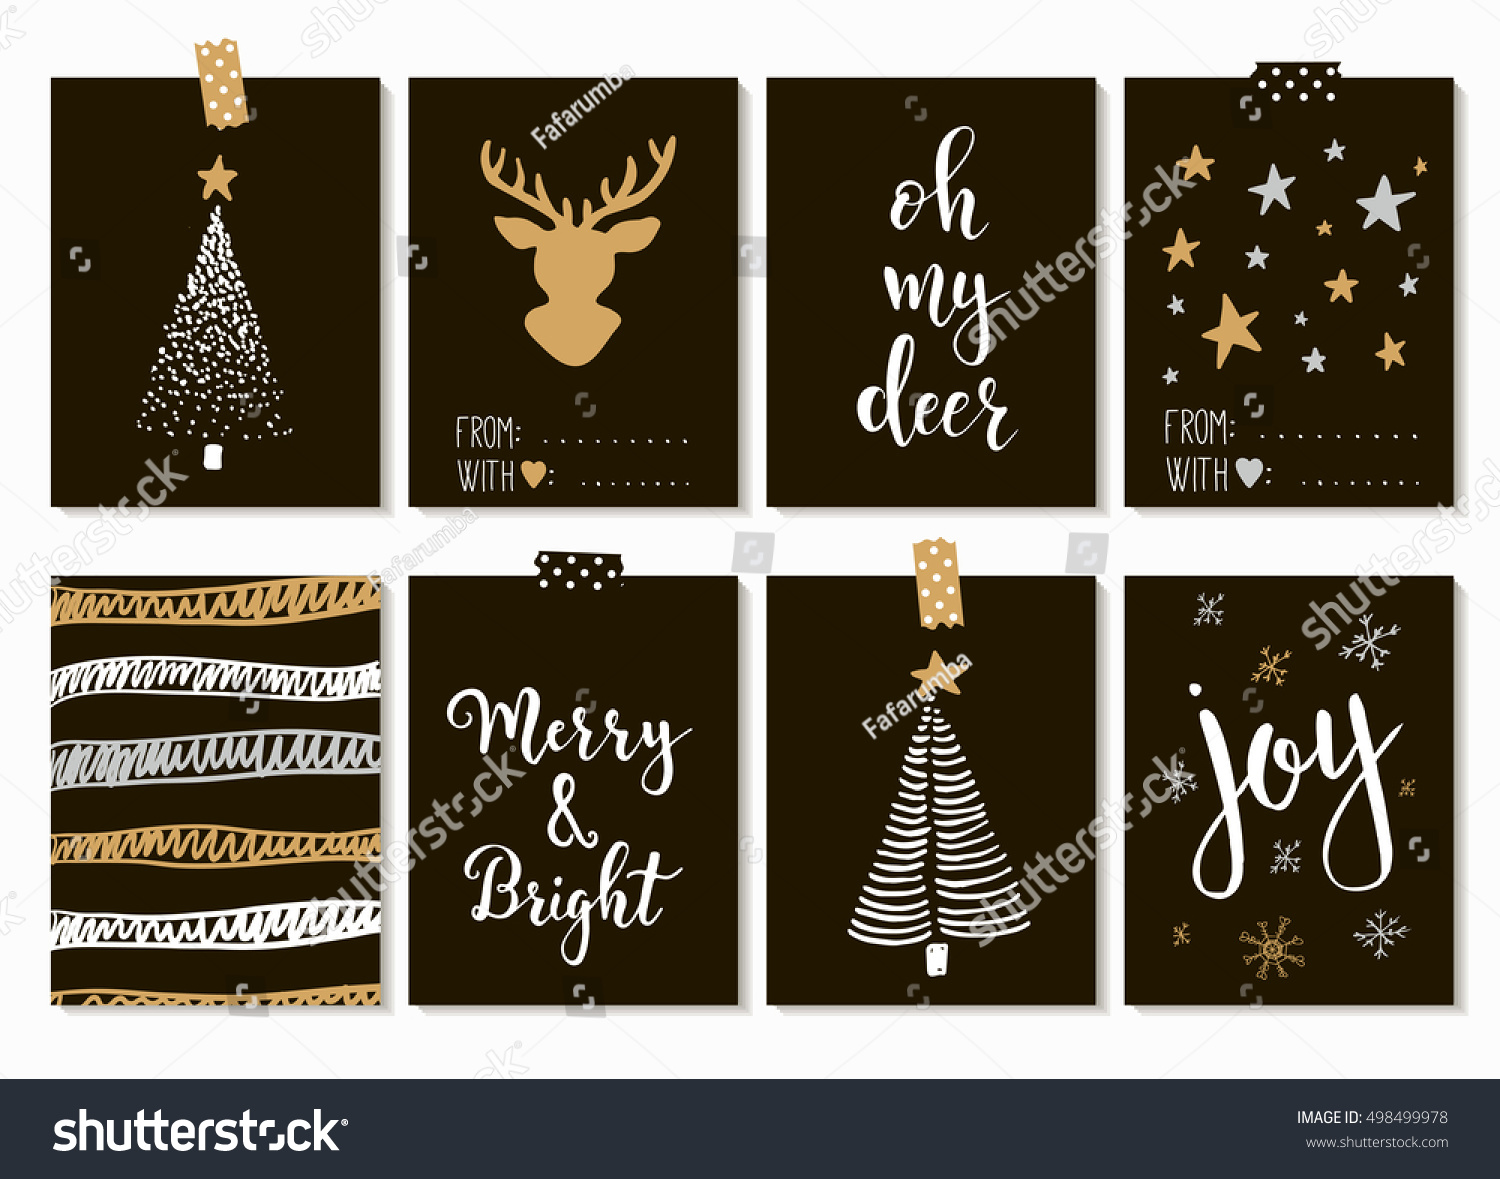 Set with Merry Christmas and Happy New Year vintage t tags and cards with calligraphy